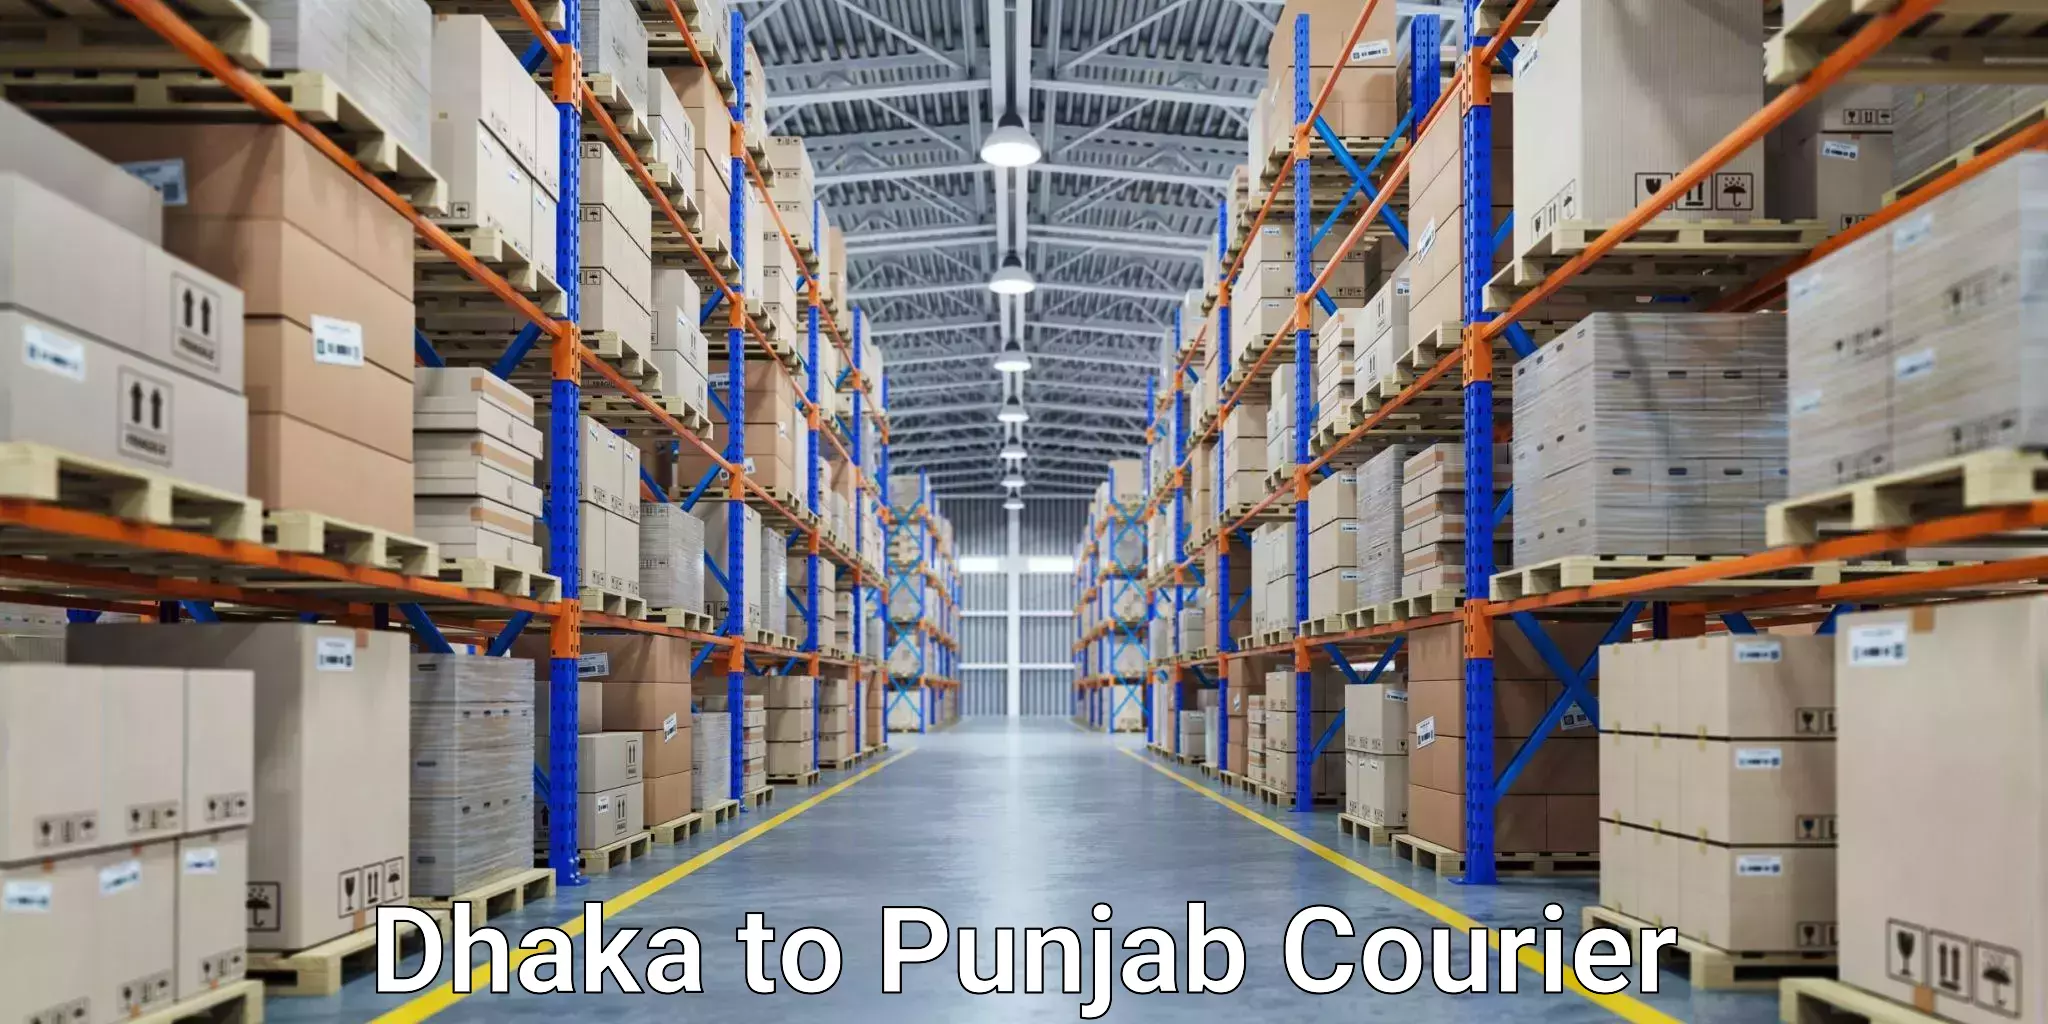 Automated shipping processes Dhaka to Mohali